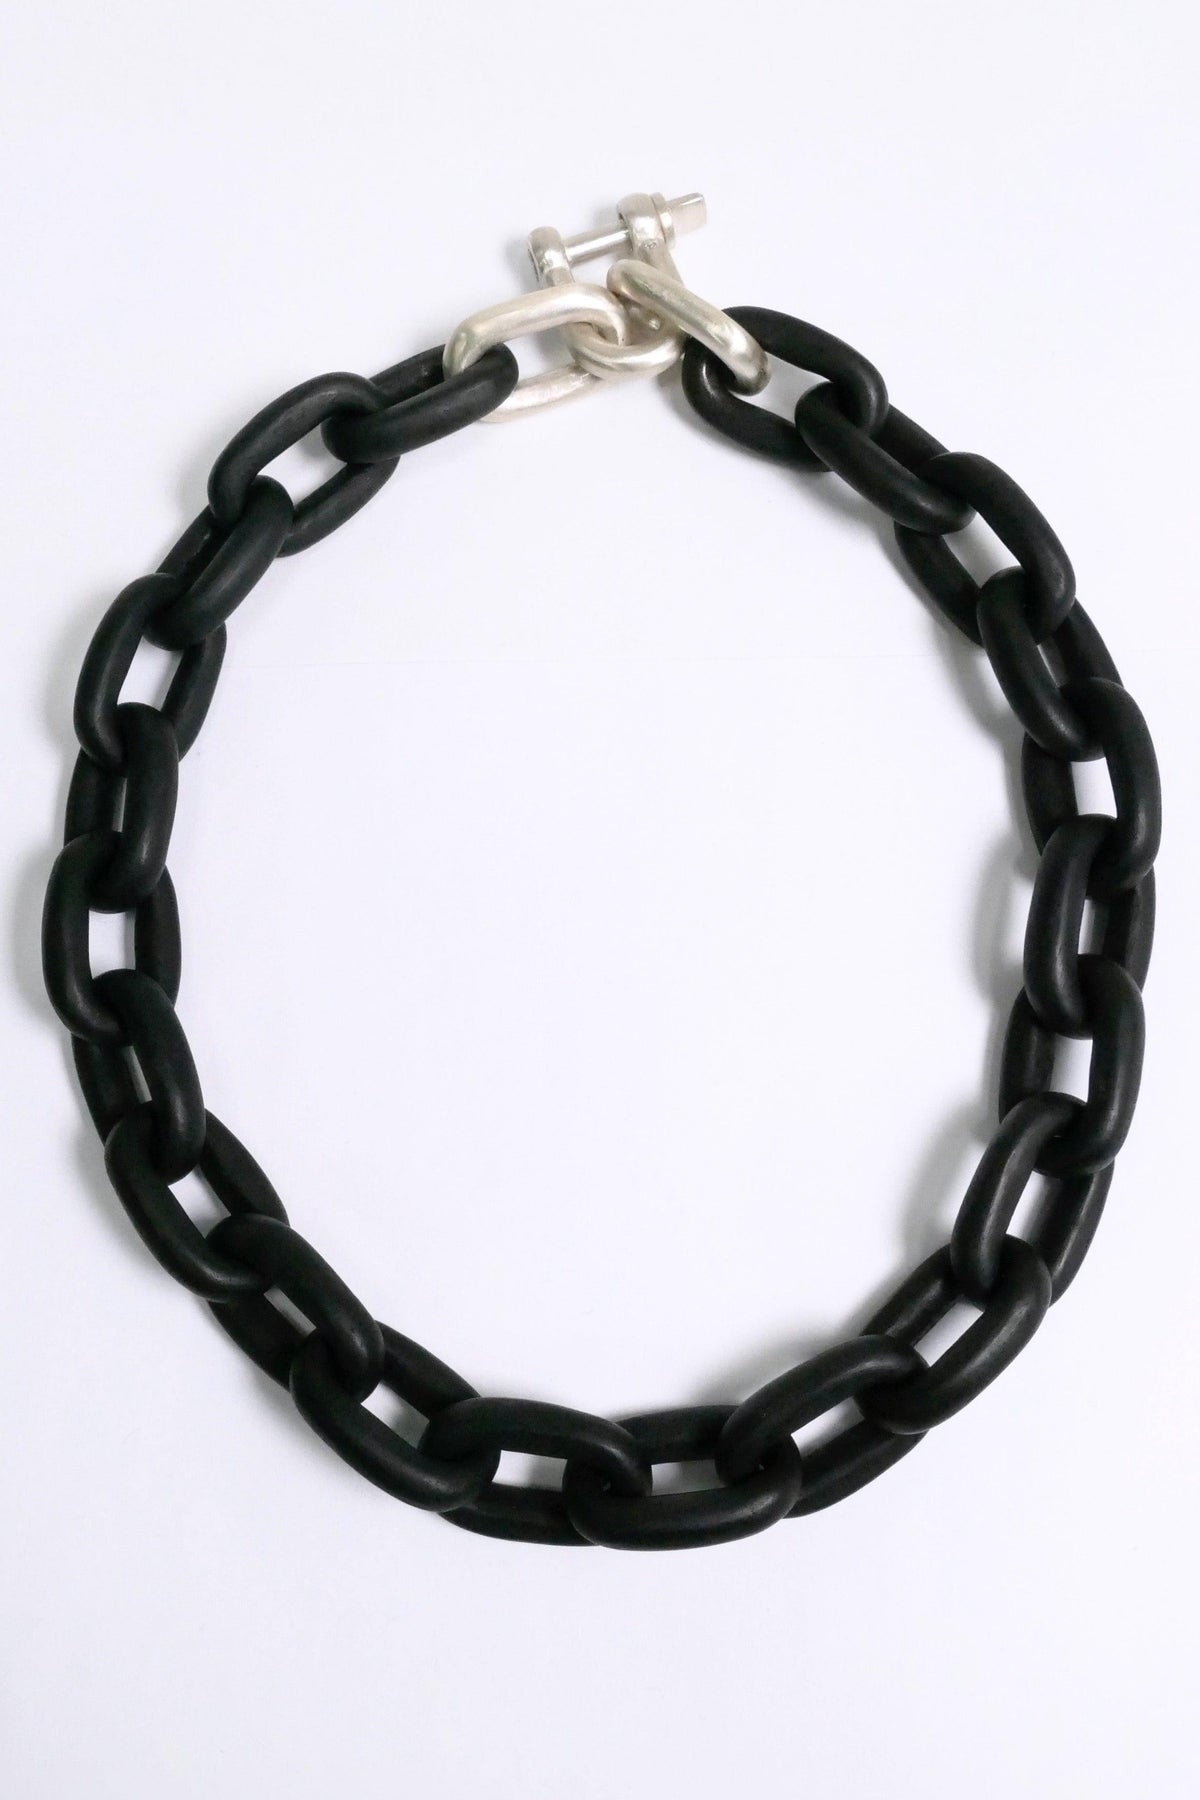 Parts of Four Necklace Charm Chain Black and Silver - Due West